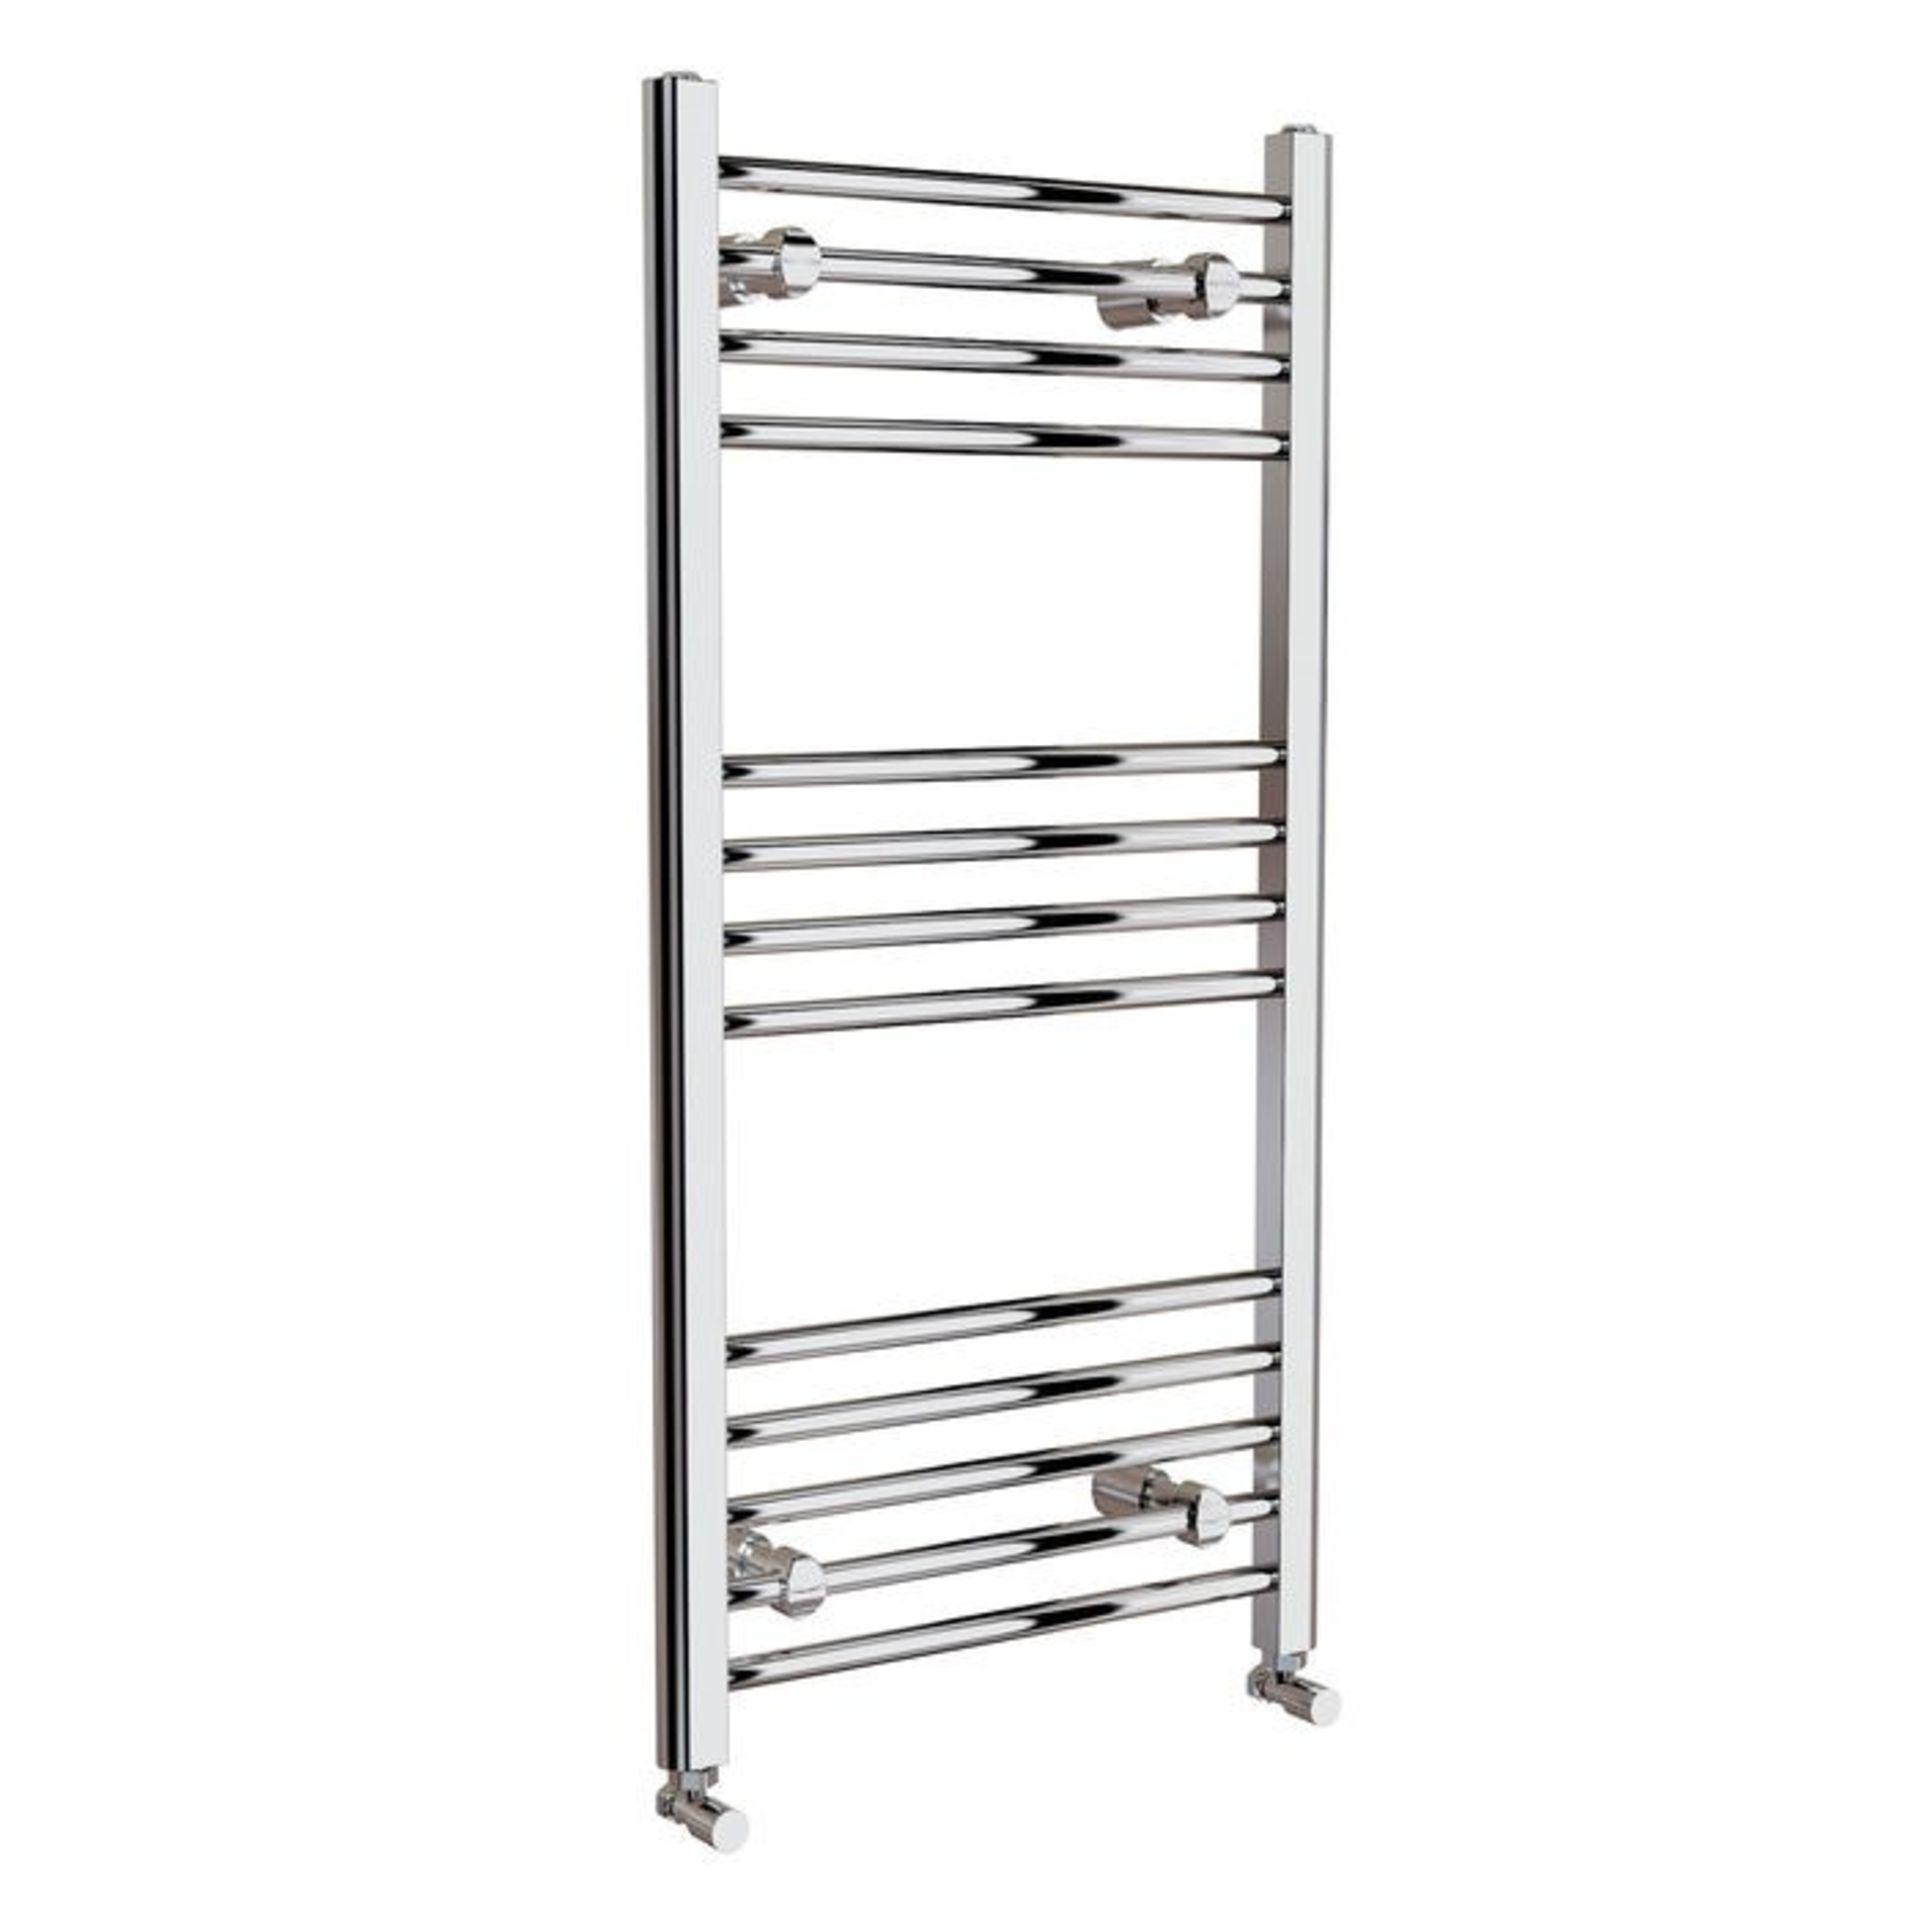 (HM53) 1100x500mm Straight Heated Towel Radiator. Made from chrome plated low carbon steel. T...